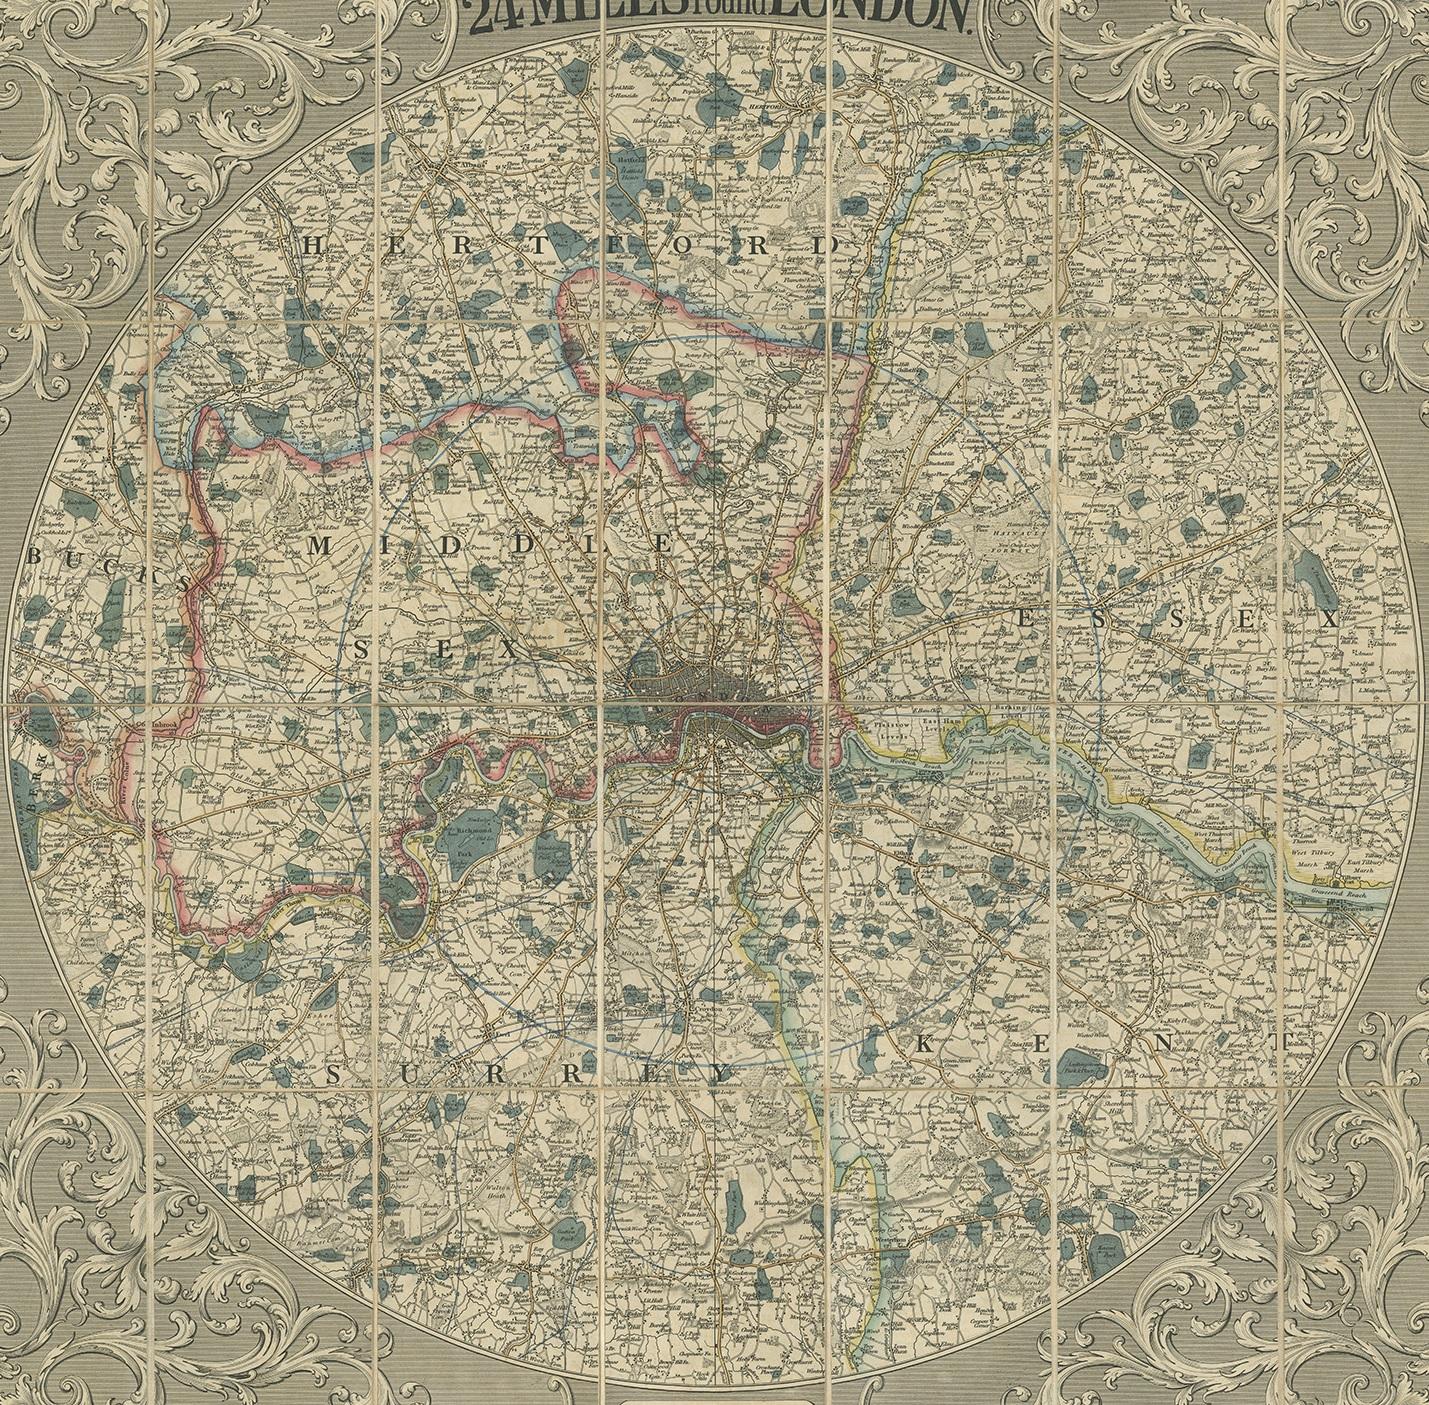 Antique map titled 'New Map Extending 24 Miles Round London, showing all the Mail, Turnpike, and Cross Roads, Gentleman's Seats, parks etc. etc. Also all the Proposed Railways, &c.'. Beautiful and large circular map with ornamental design in